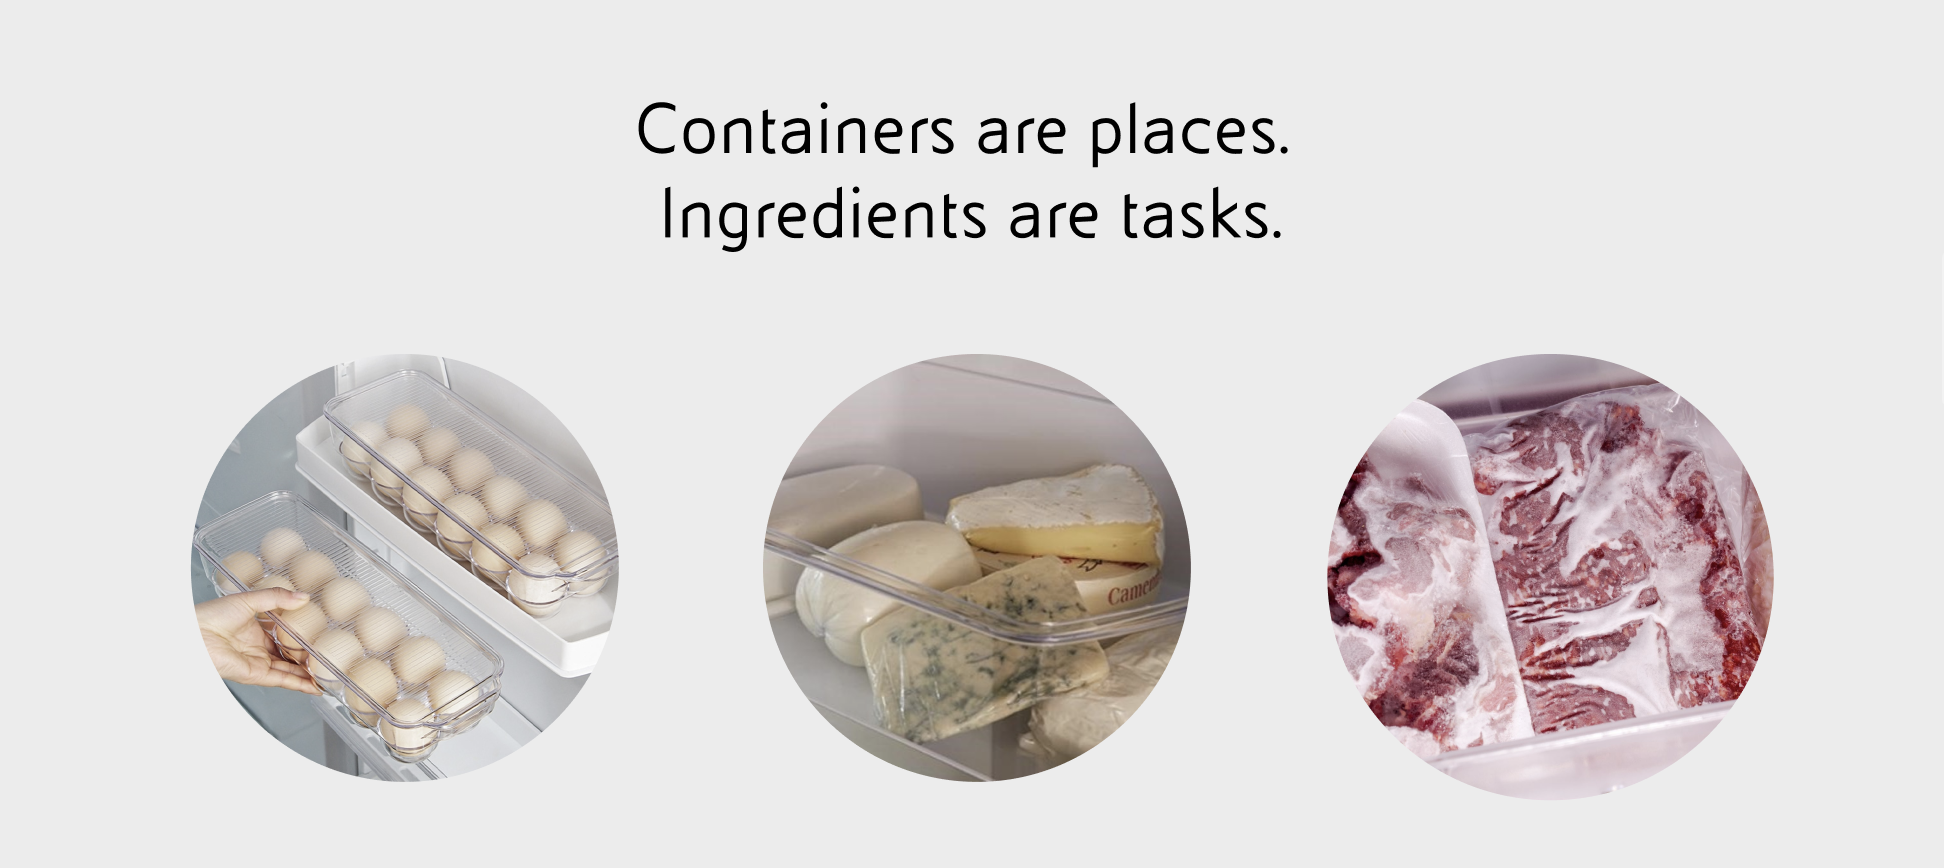  From these attributes, we dug deeper and developed this metaphor by thinking of containers as places and ingredients as tasks. 